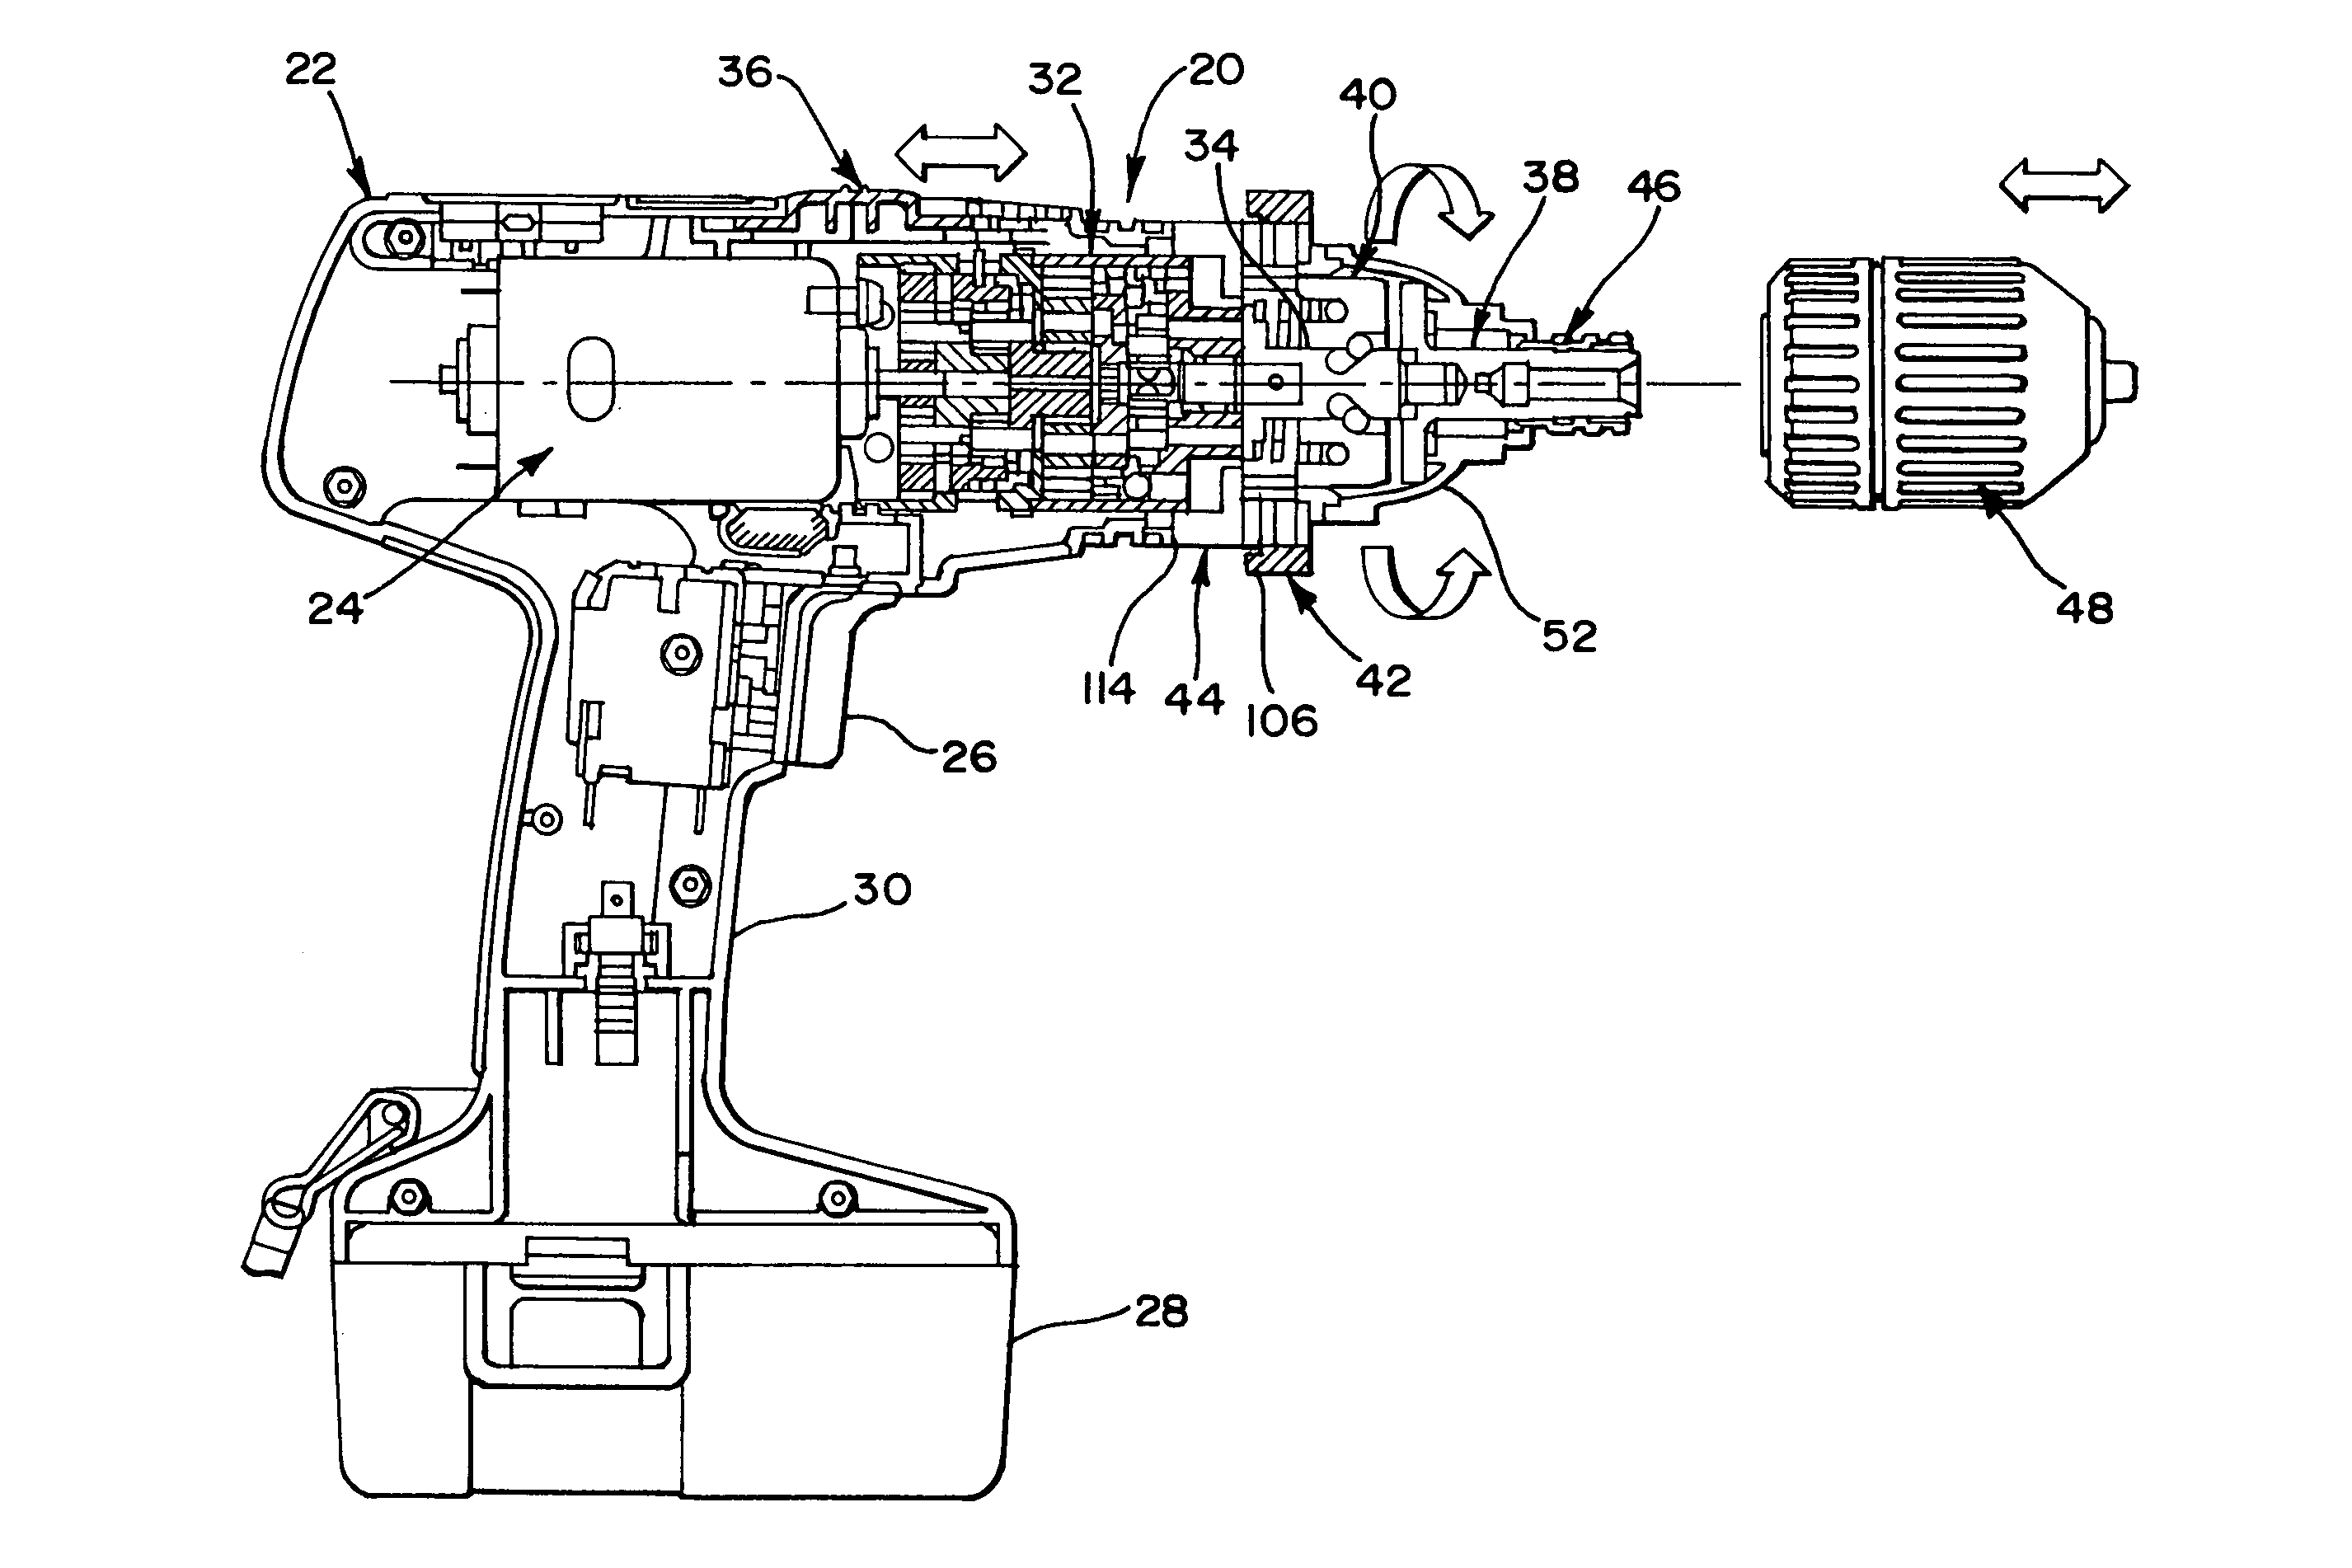 Mode selector mechanism for an impact driver